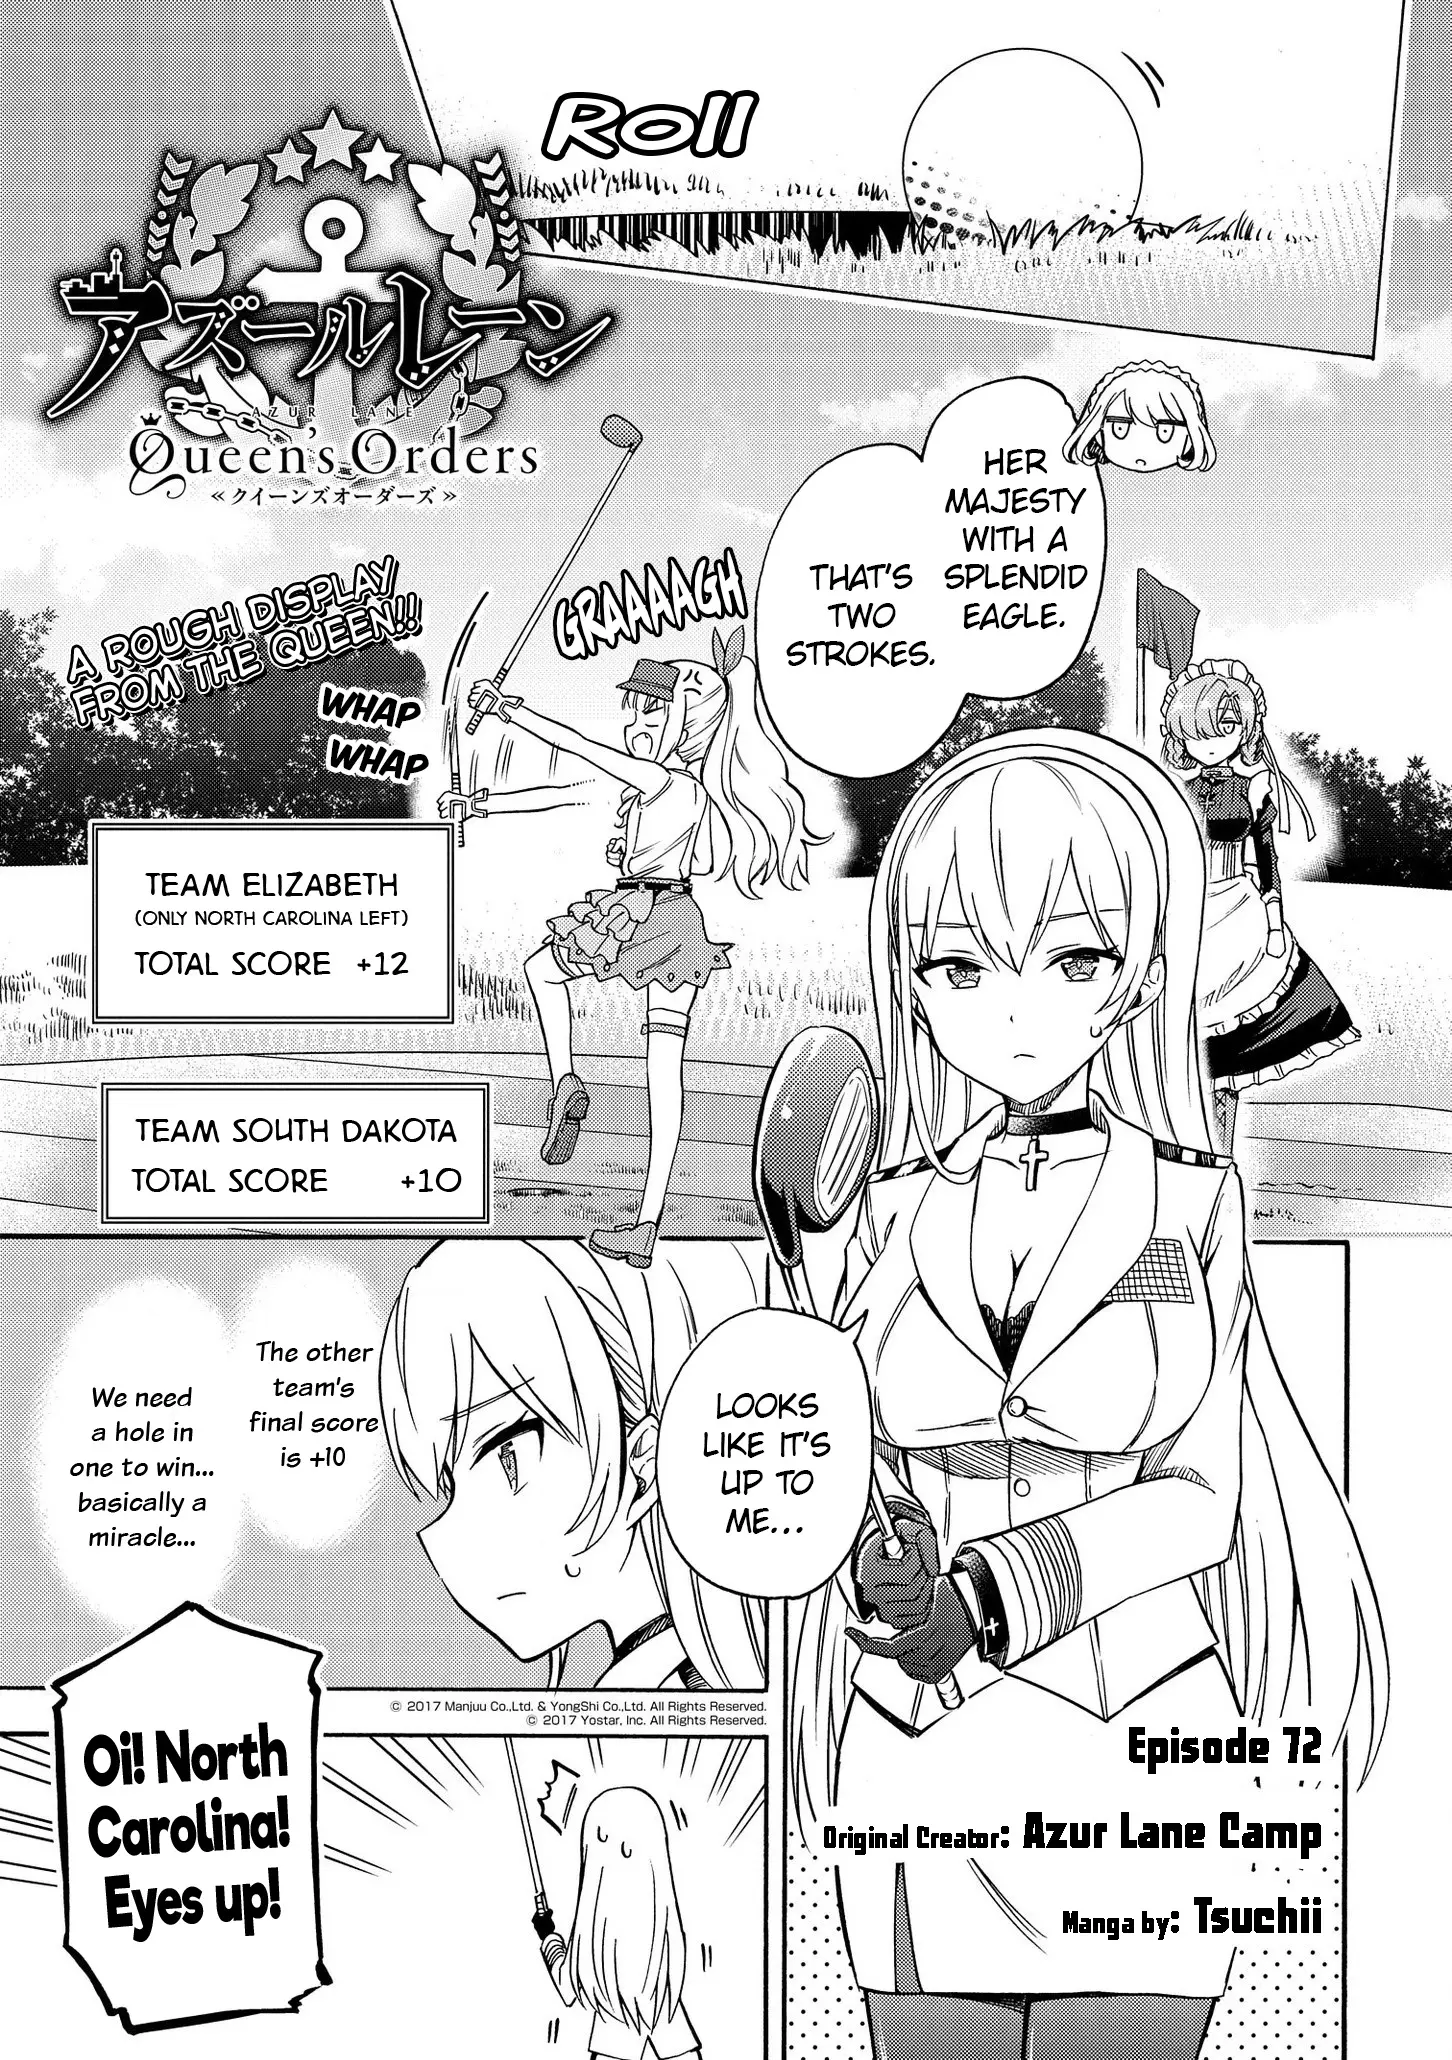 Azur Lane: Queen's Orders - 72 page 1-a7383a06